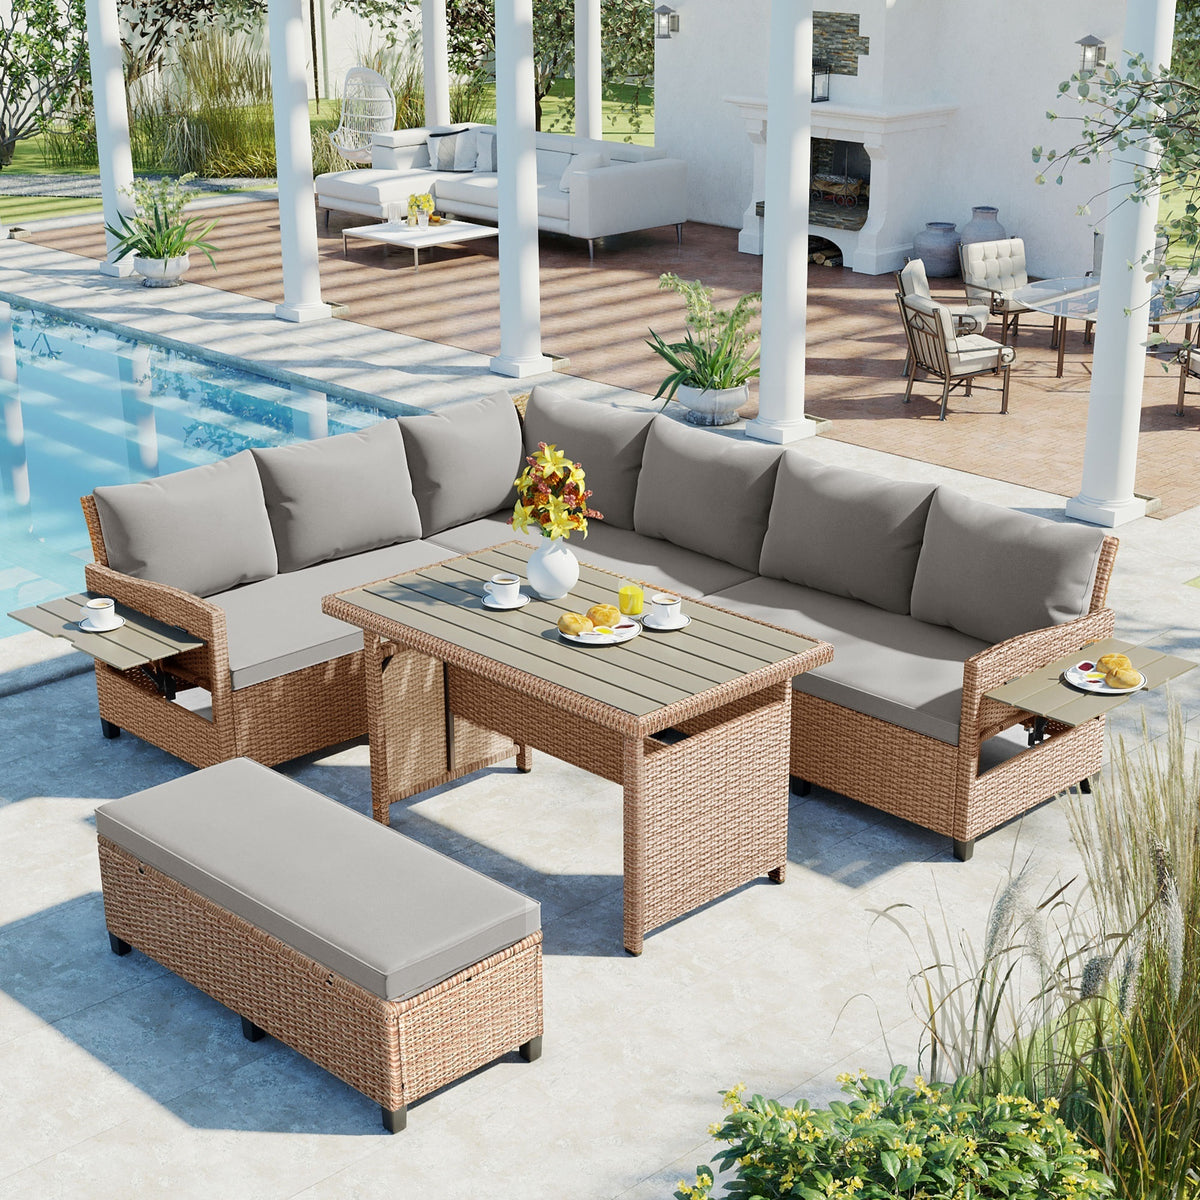 5-Piece Patio Dining Set with 2 Extendable Side Tables, Dining Table and Washable Covers, Brown